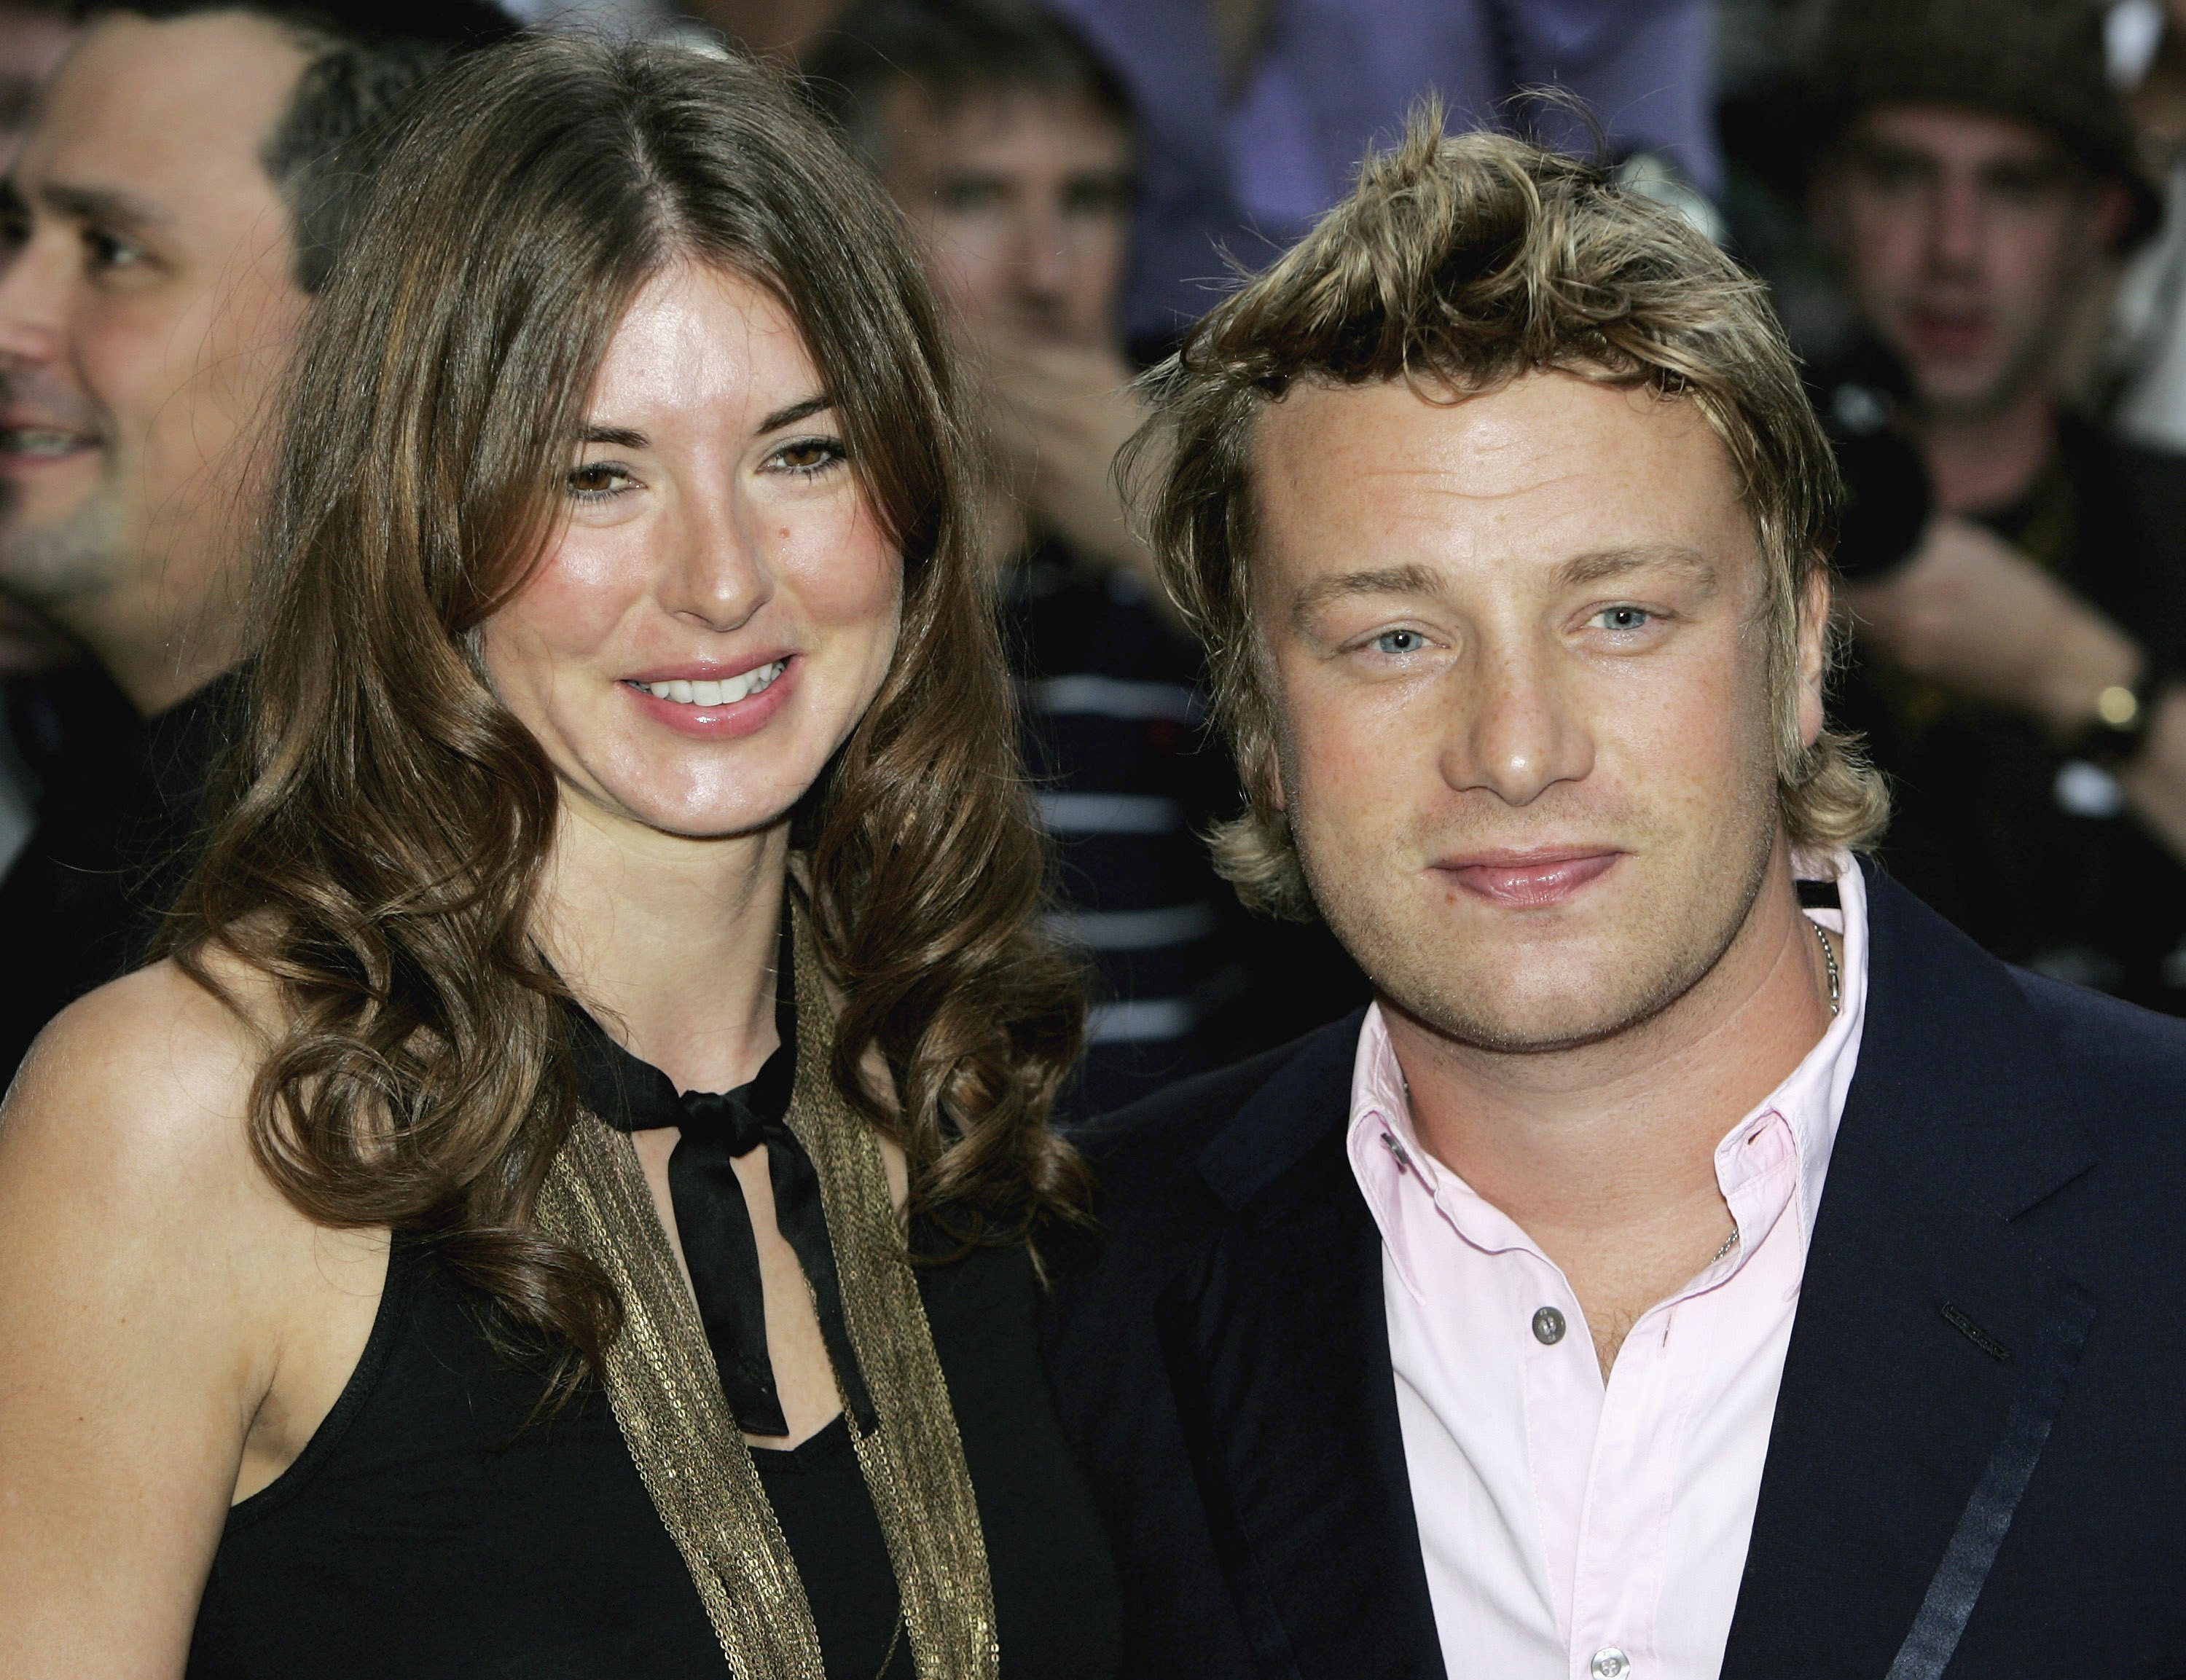 Jamie Oliver and his wife Juliette "Jools" Norton attend the GQ Men of the Year Awards on September 5, 2006, in London, England. | Source: Getty Images